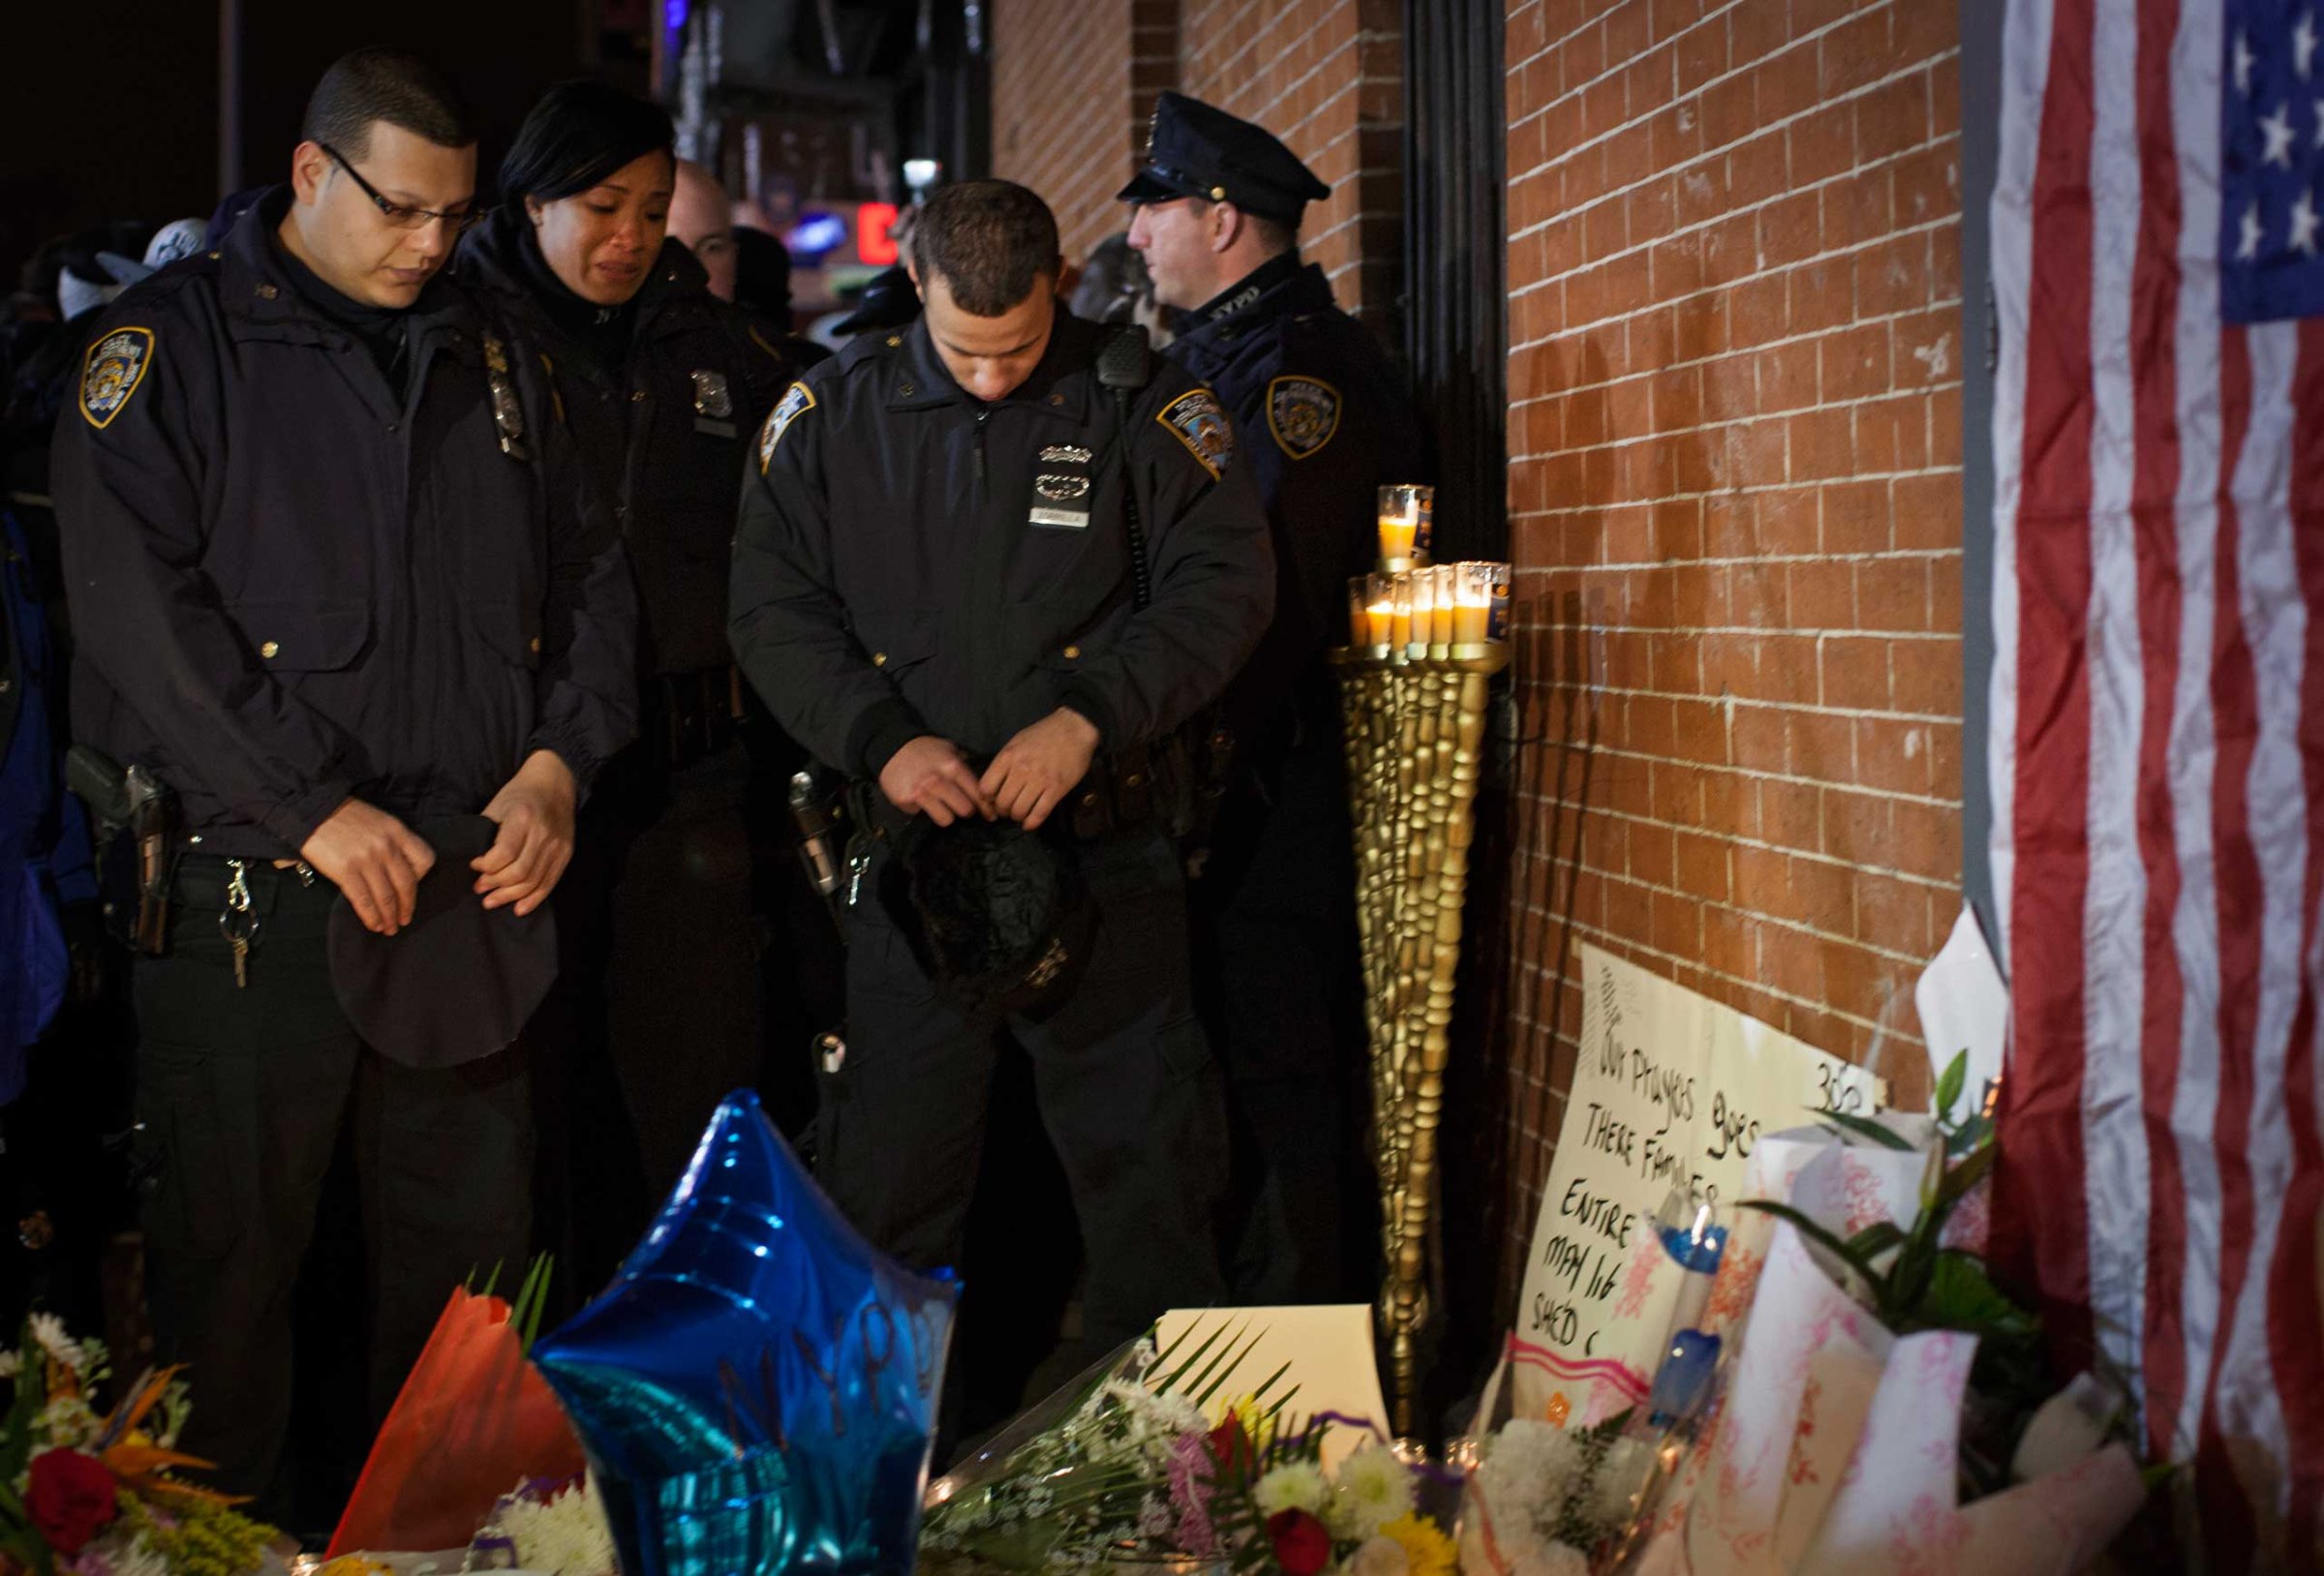 Police officers pause in front of a memorial for two police officers who were killed in Brooklyn on Dec. 21, 2014.